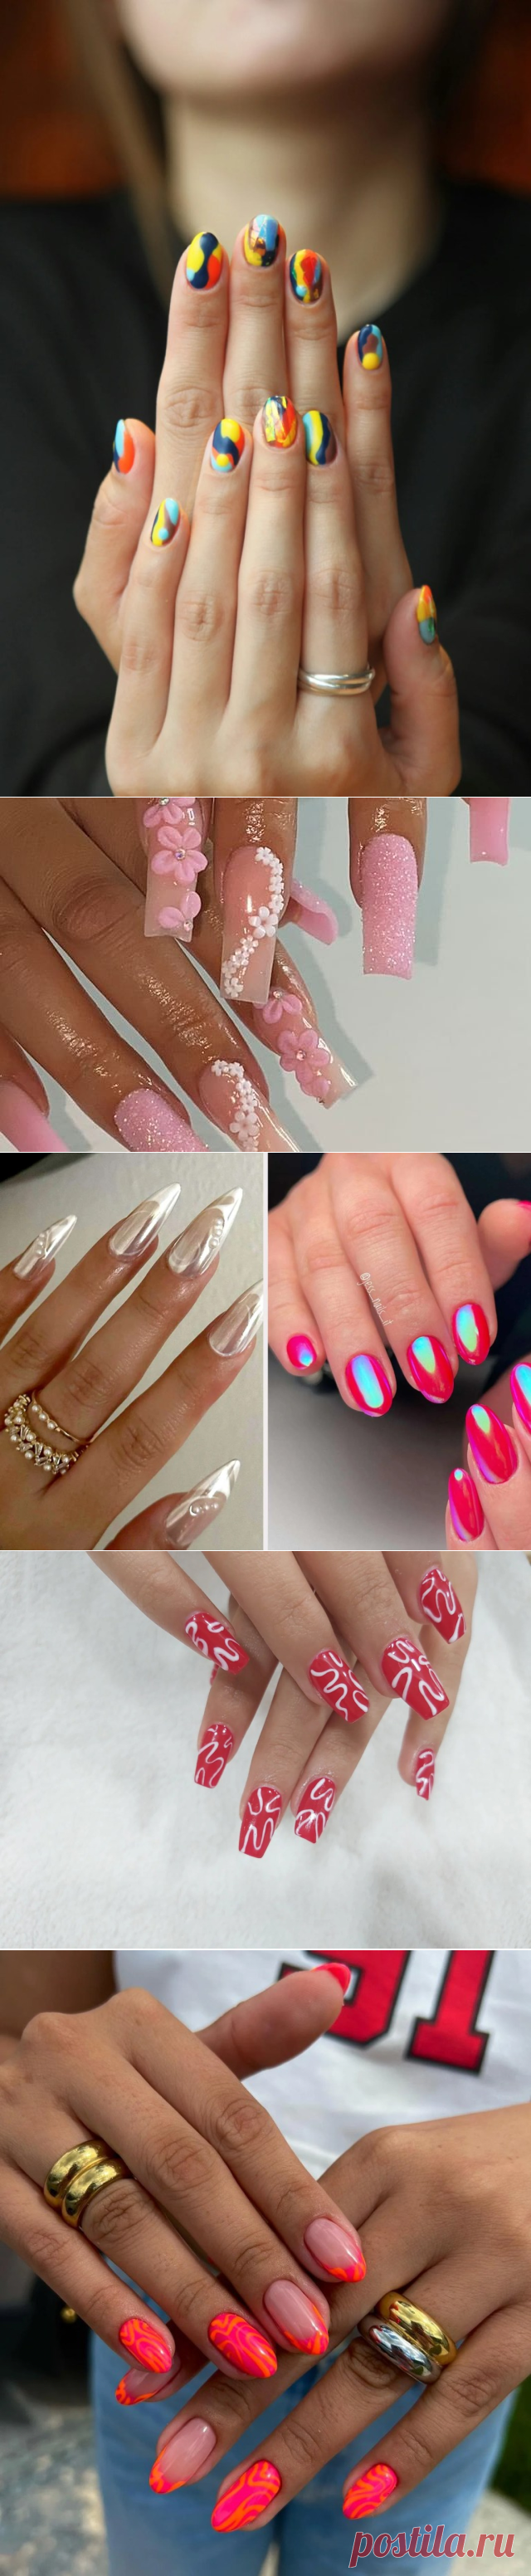 Summer Nail Trends: Bright, Bold, and Beautiful